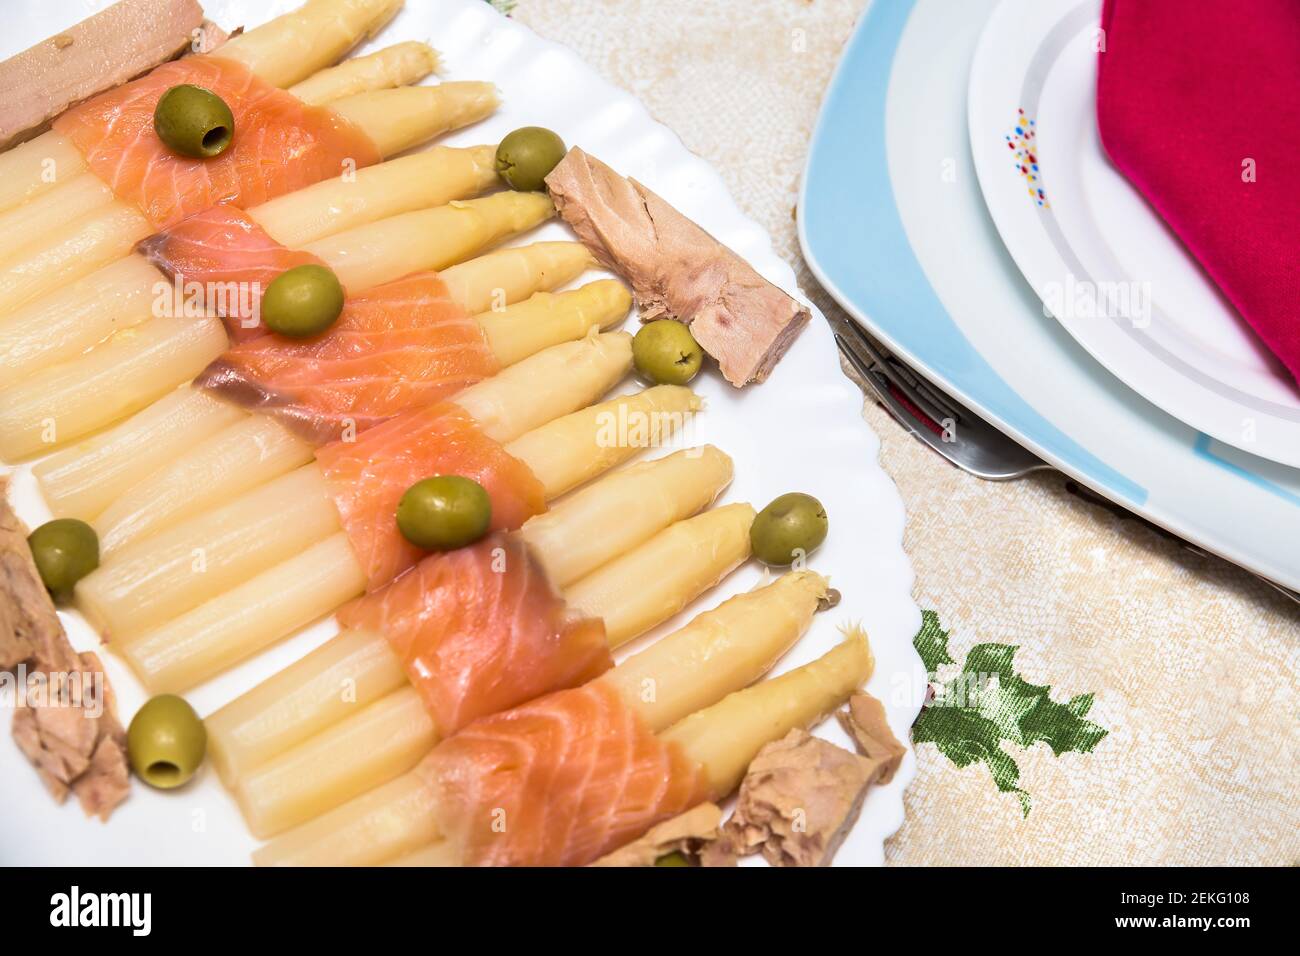 white asparagus salad with salmon, olives and tuna on white dish Stock Photo